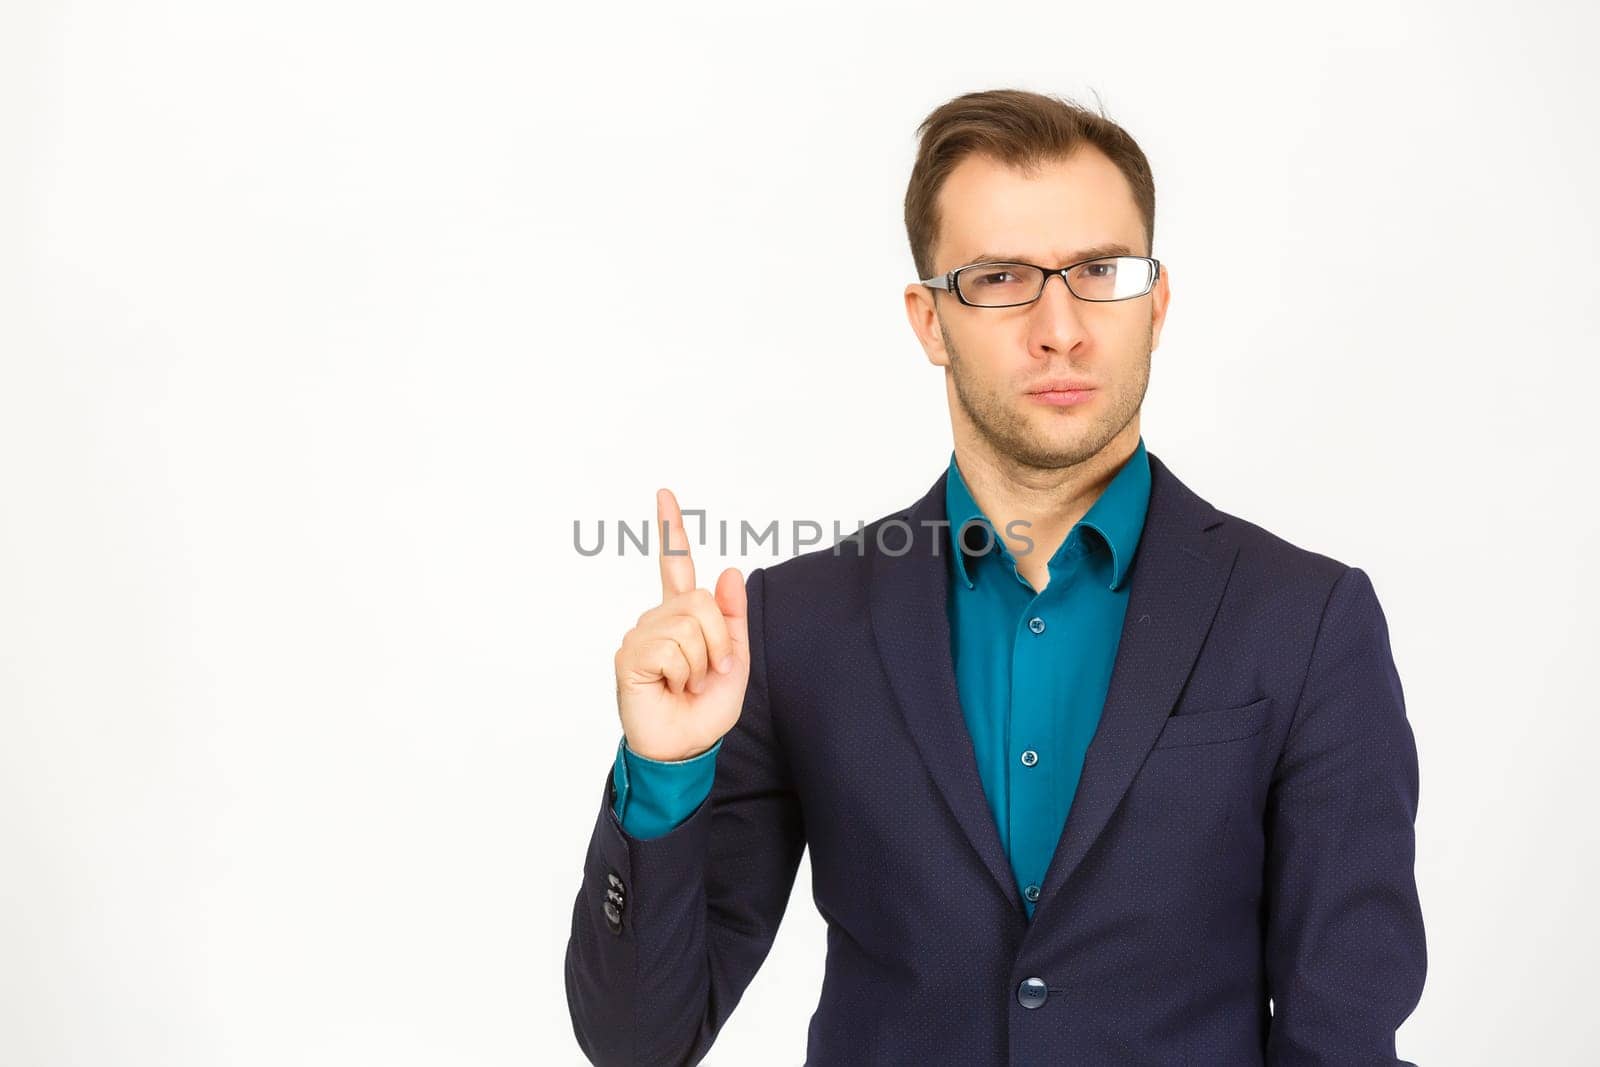 Man standing and presenting something above against white background